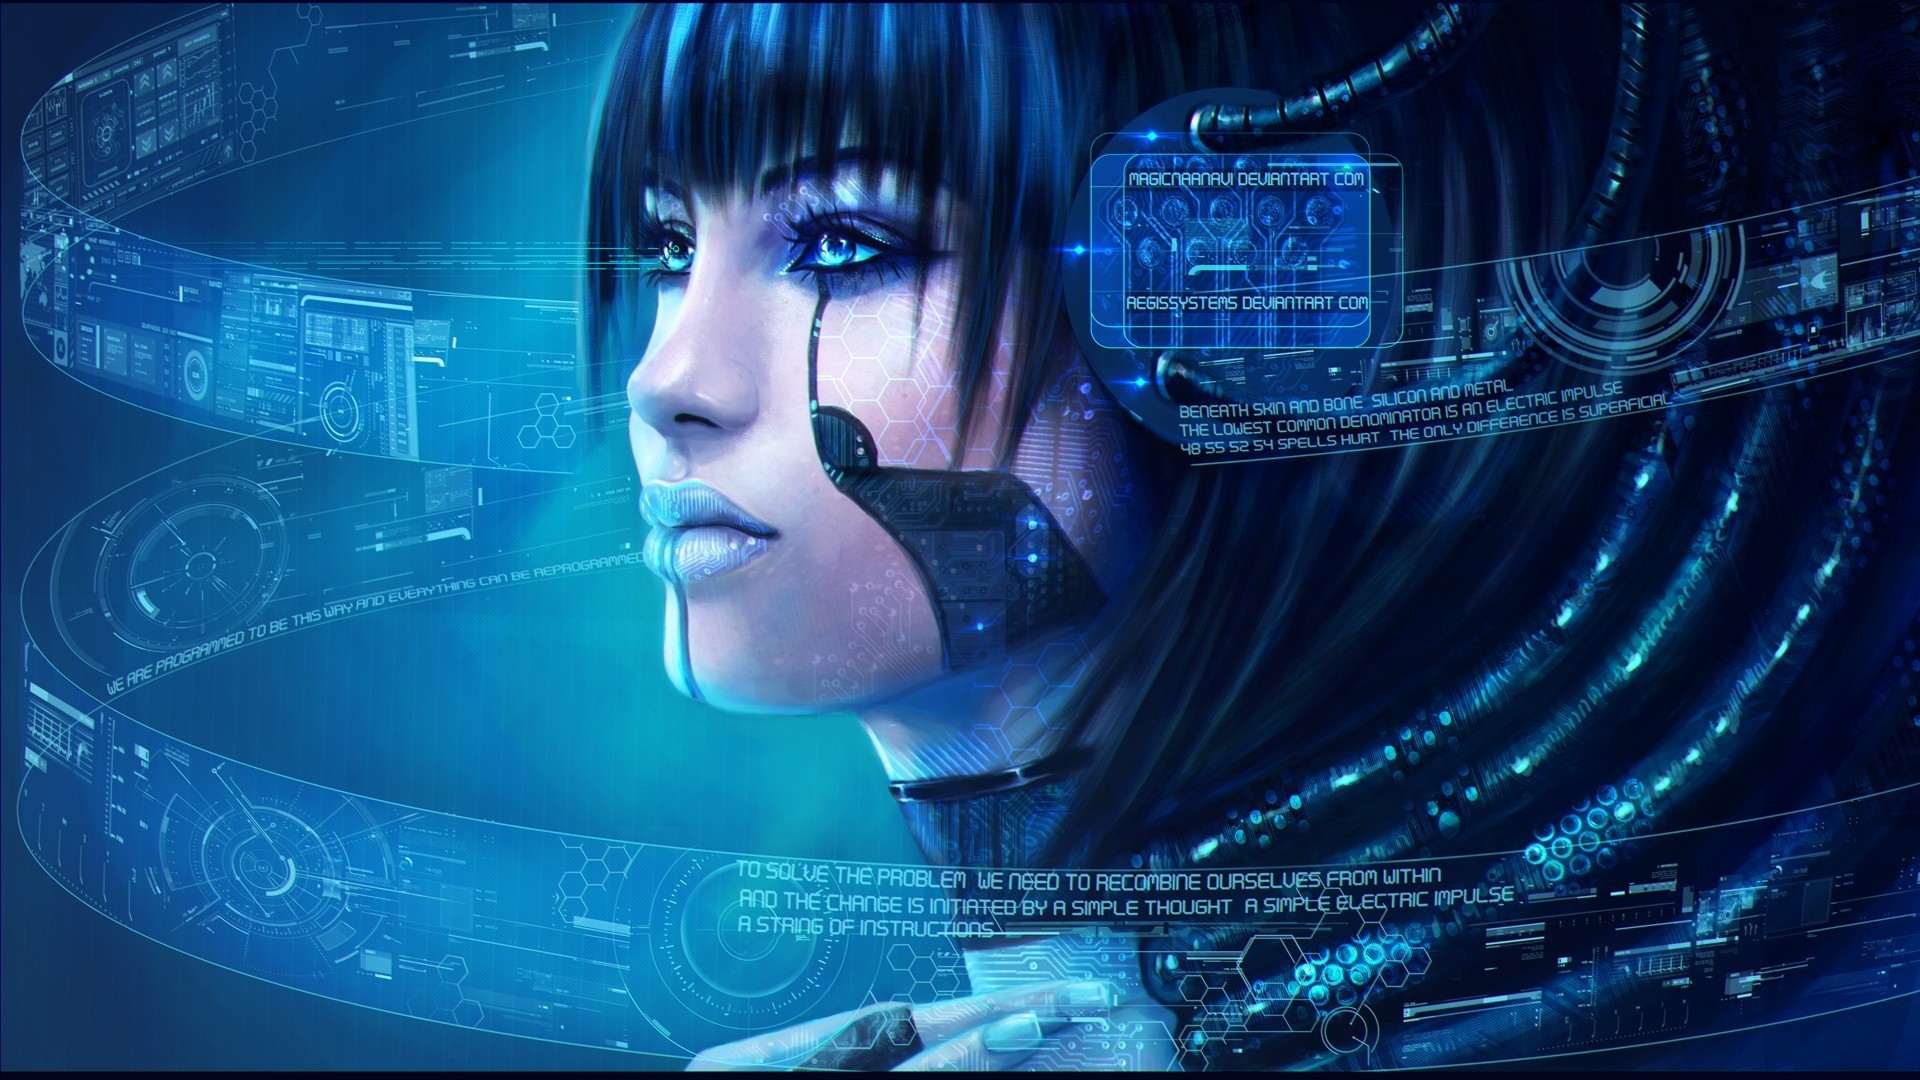 Wallpaper, illustration, anime, blue eyes, space, blue background, Aztec, technology, wires, blue lipstick, screenshot, computer wallpaper, special effects 1920x1080